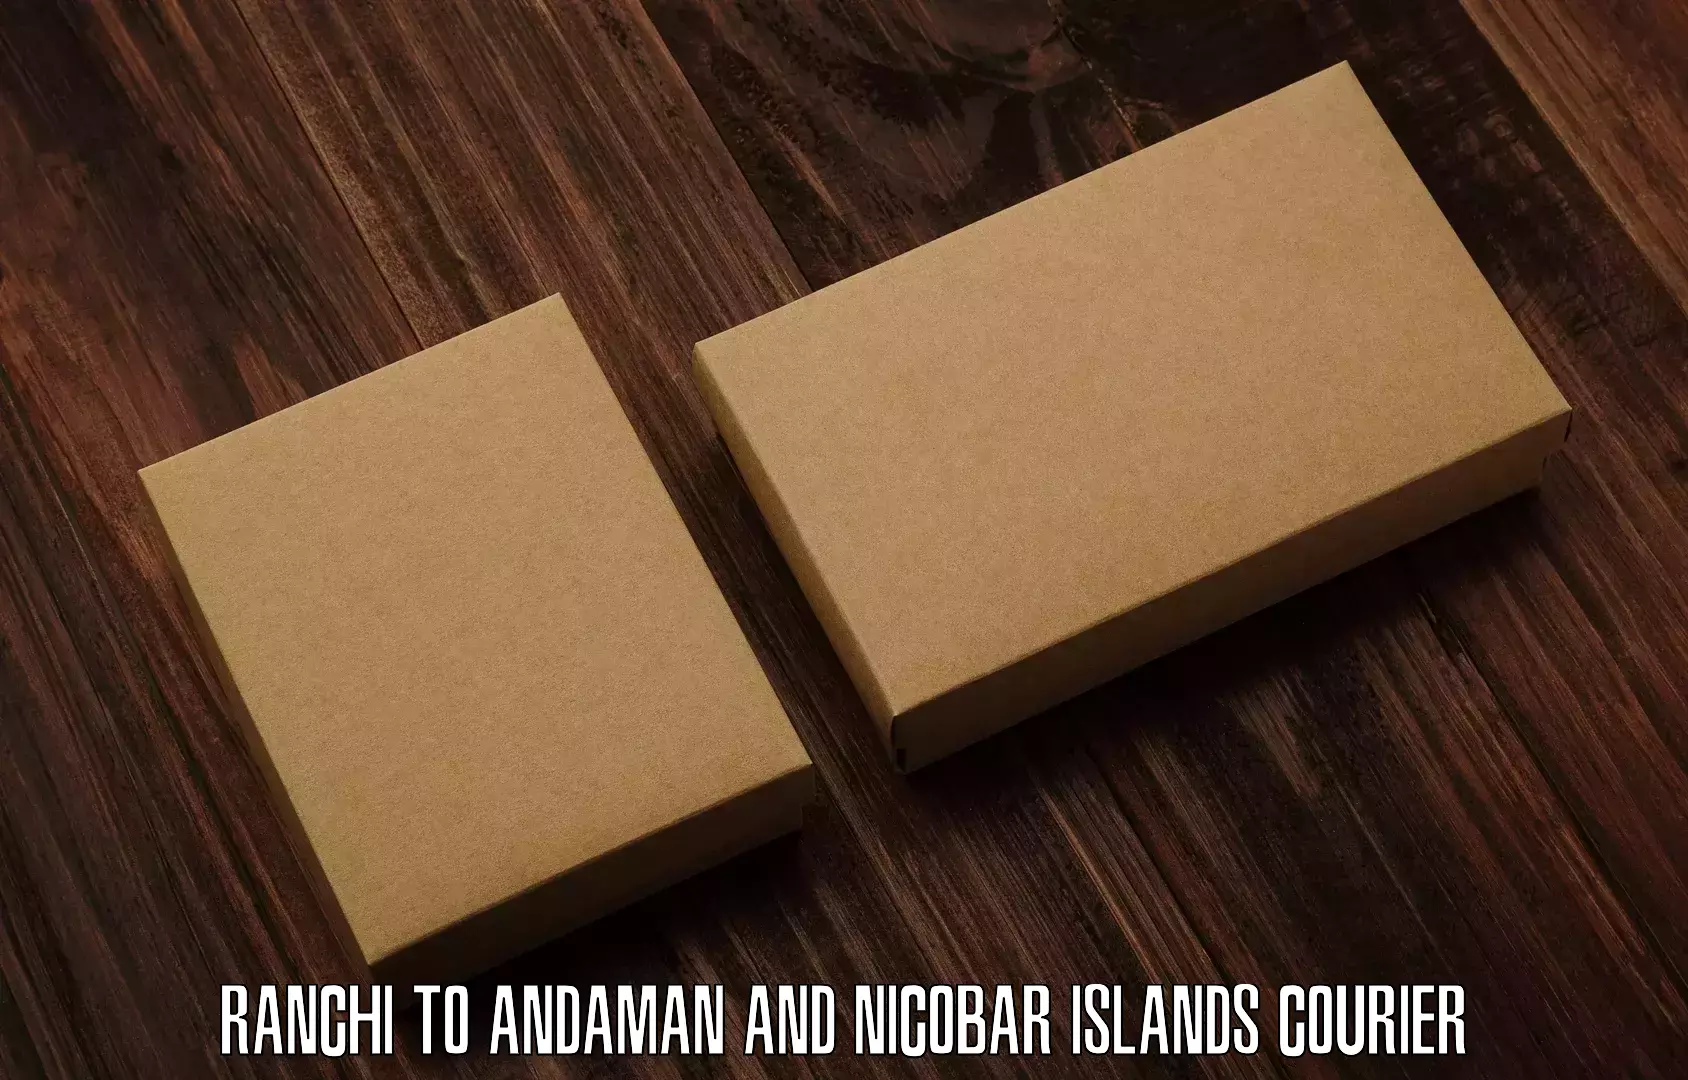 Same-day delivery solutions Ranchi to Andaman and Nicobar Islands